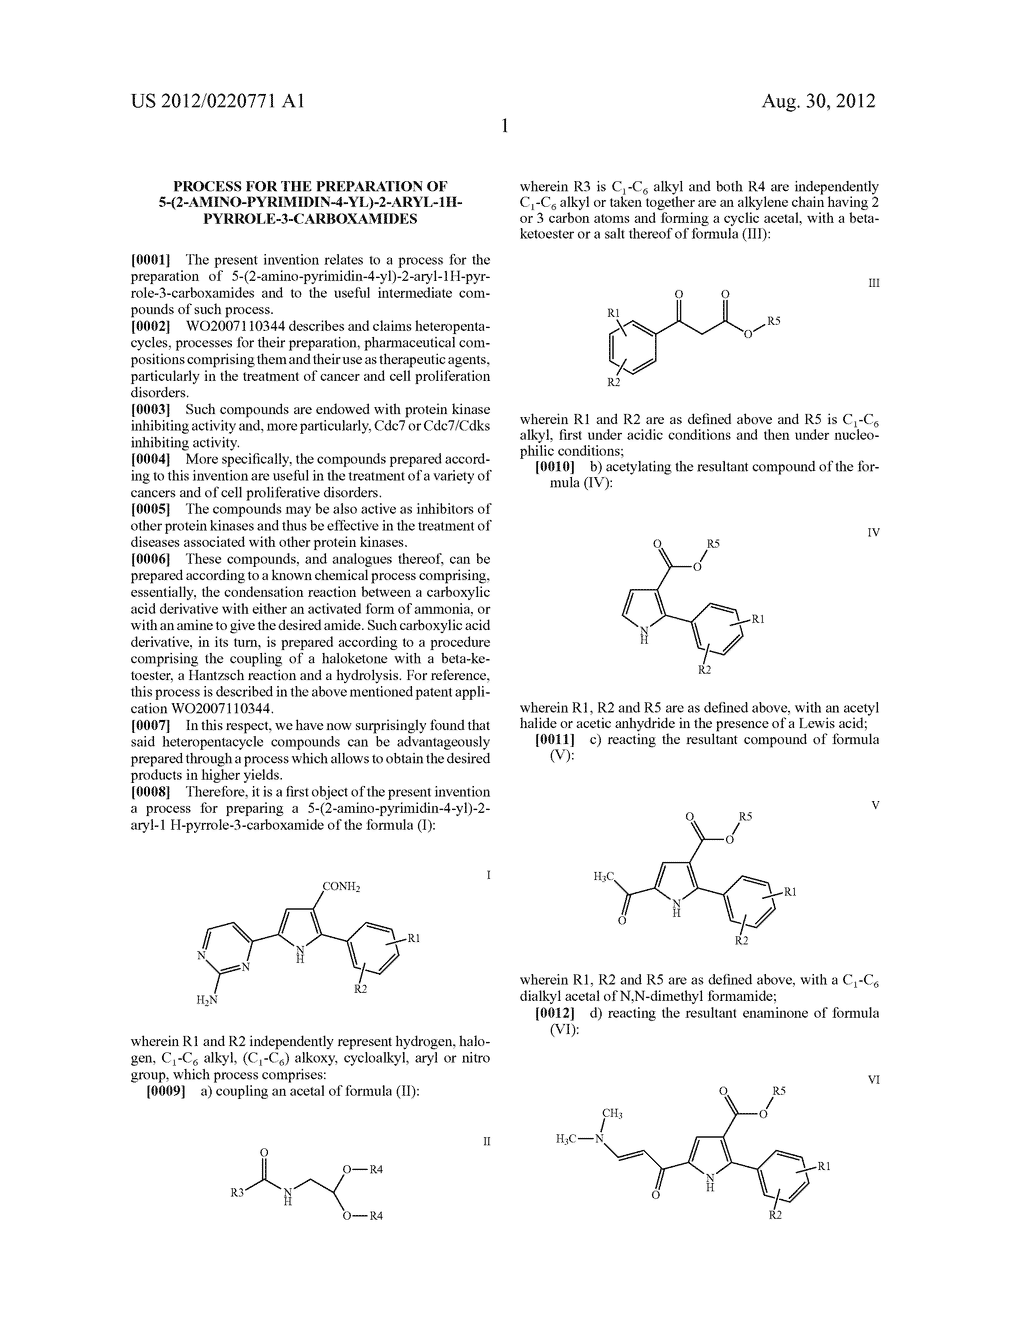 PROCESS FOR THE PREPARATION OF     5-(2-AMINO-PYRIMIDIN-4-YL)-2-ARYL-1H-PYRROLE-3-CARBOXAMIDES - diagram, schematic, and image 02